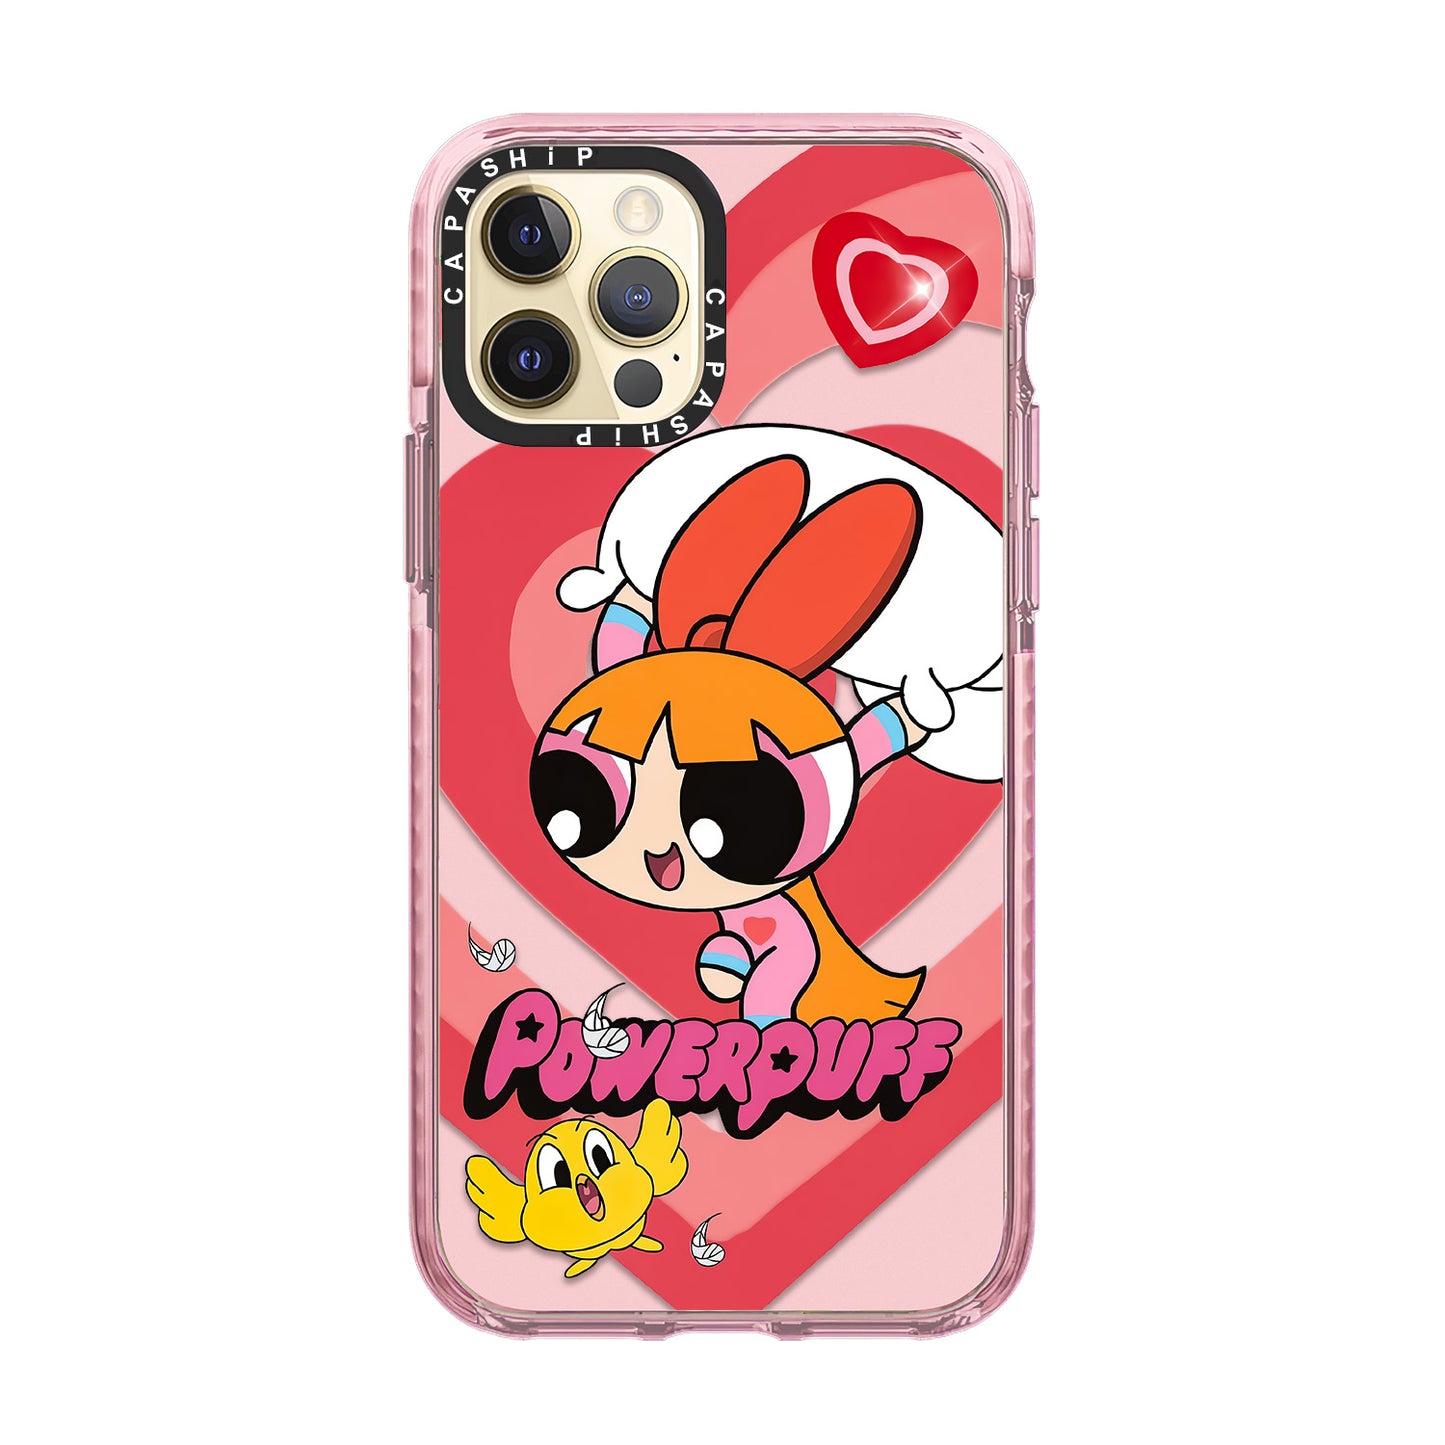 Little girl police design phone case for iPhone